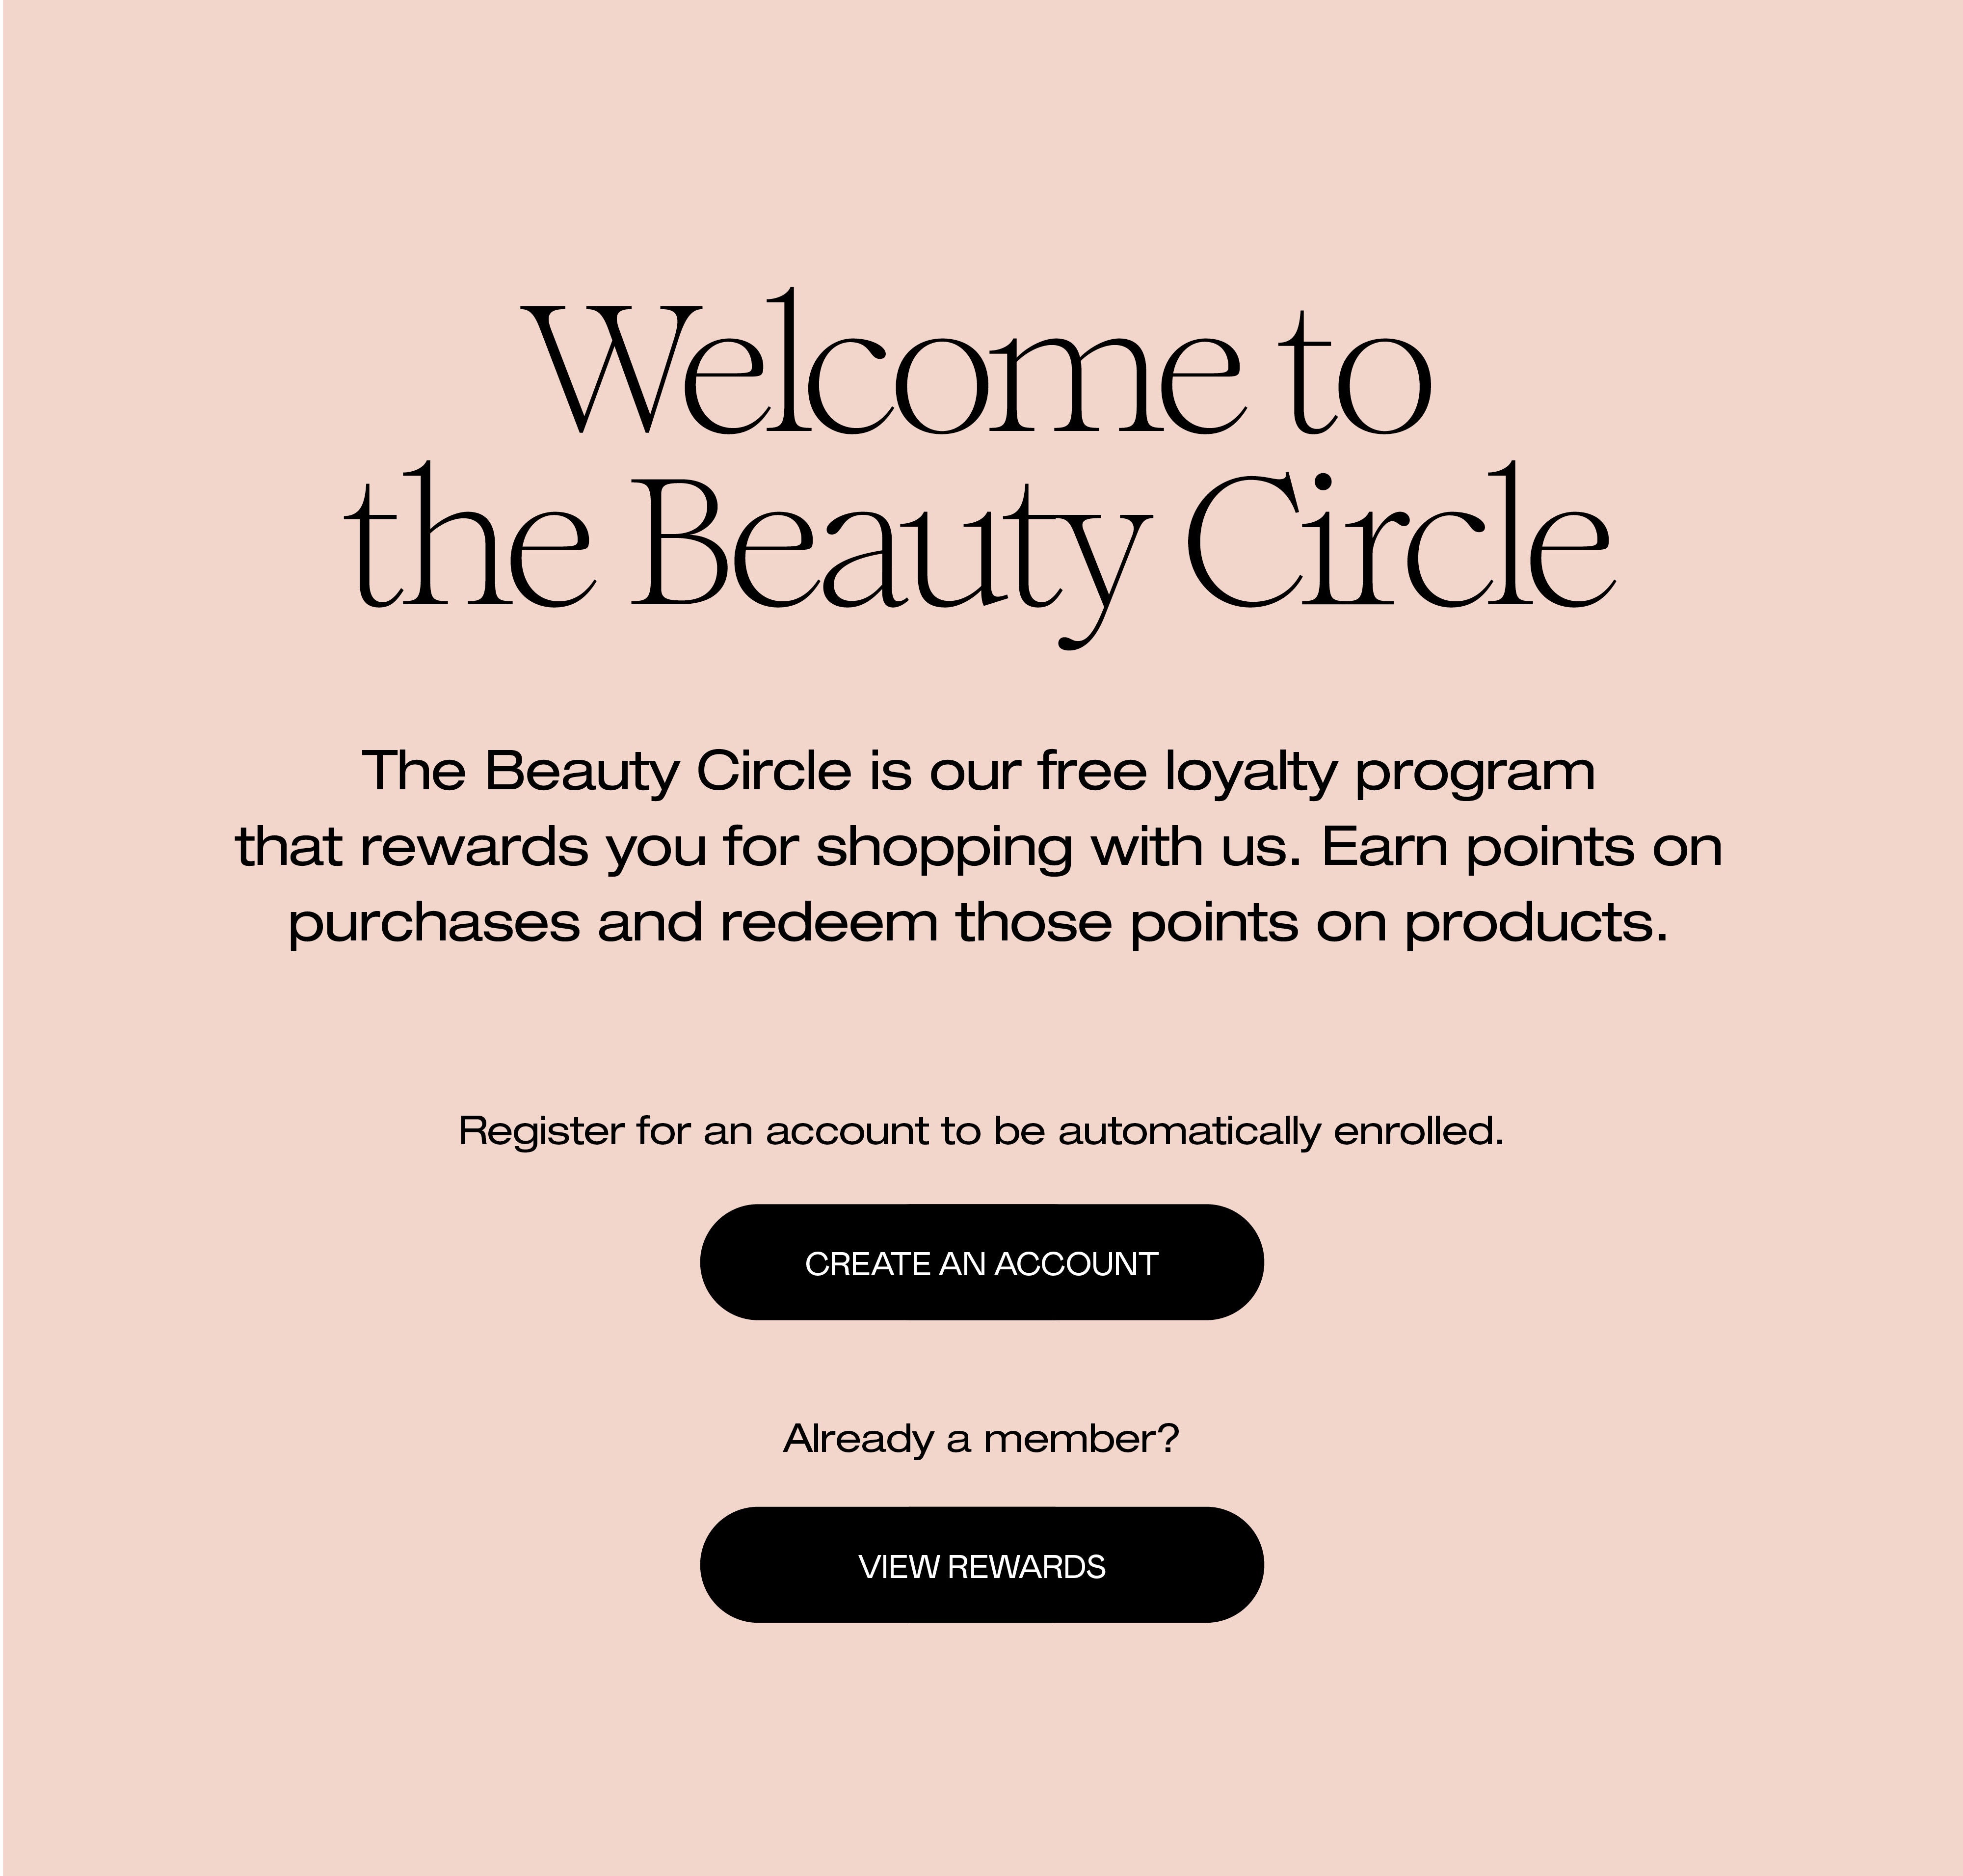 The Beauty Circle is our free loyalty program that rewards you for shopping with us. Earn points on purchases and redeem those points on products. Register for an account to be automatically enrolled.